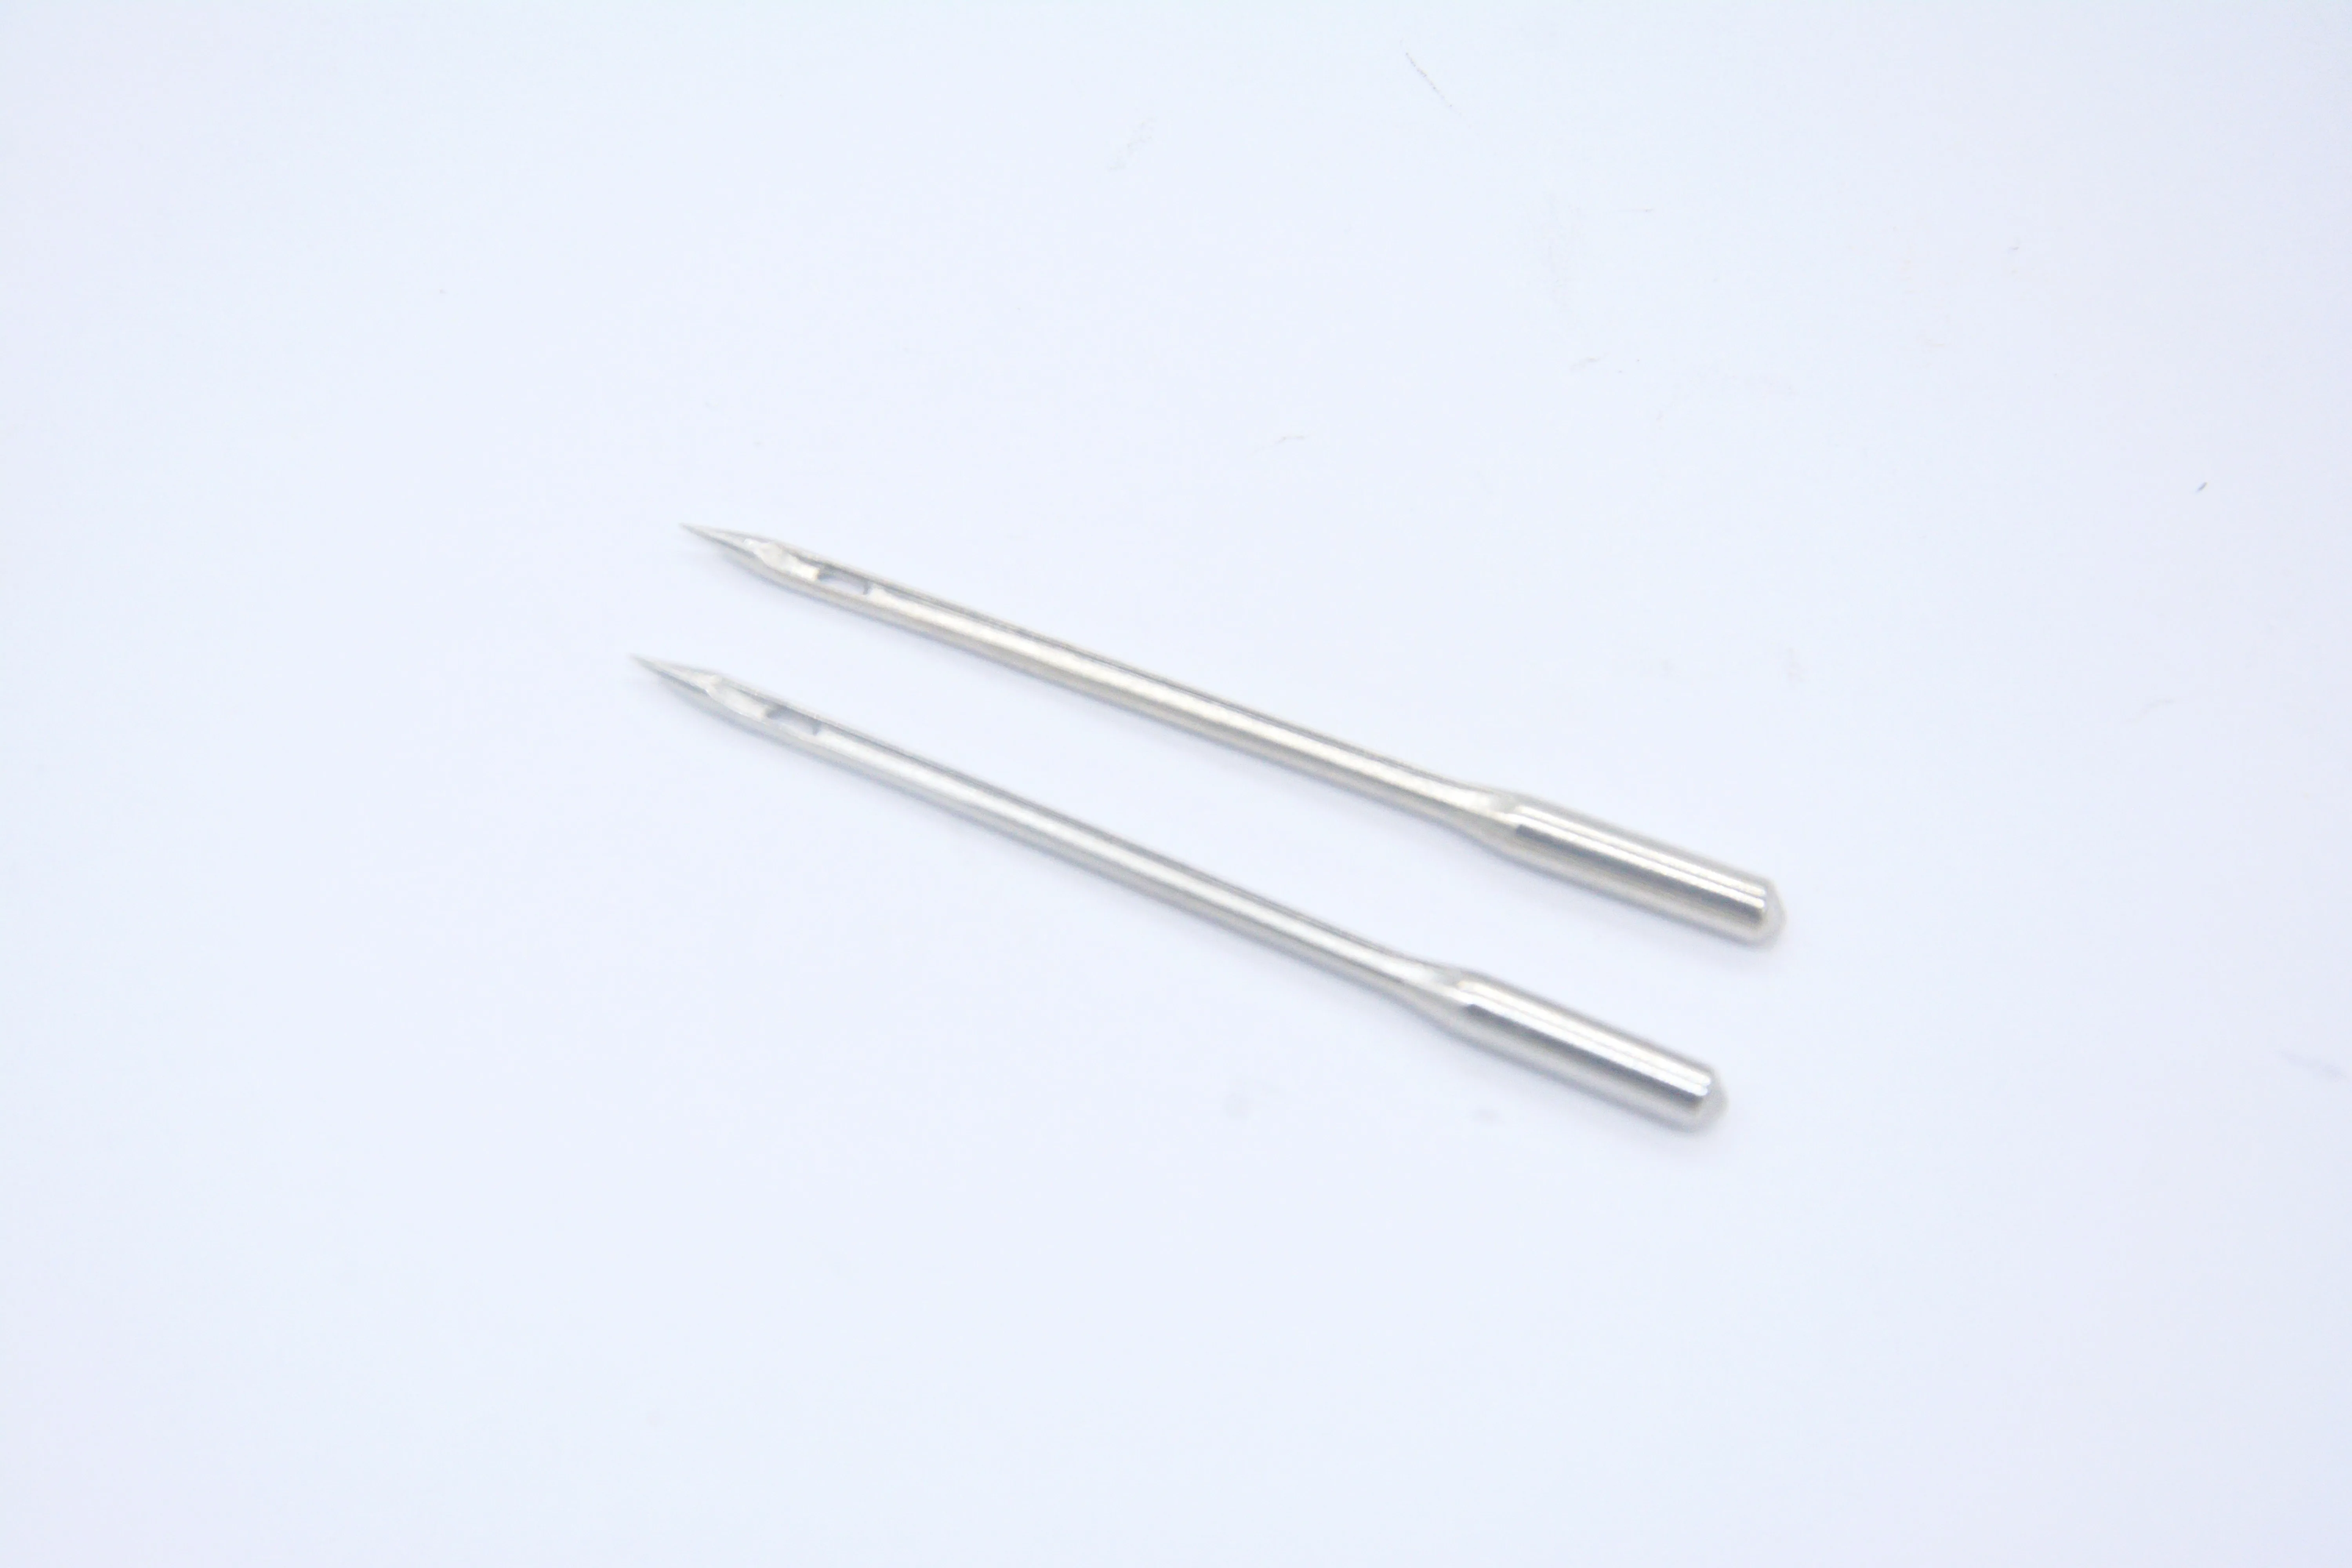 10PCS Sewing Machine Needles DIY Steel Industrial Embroidery Machine Needles  Accessory for GK35 2C GK35 6 GK35 6A GK35 8 GK68 2 - AliExpress